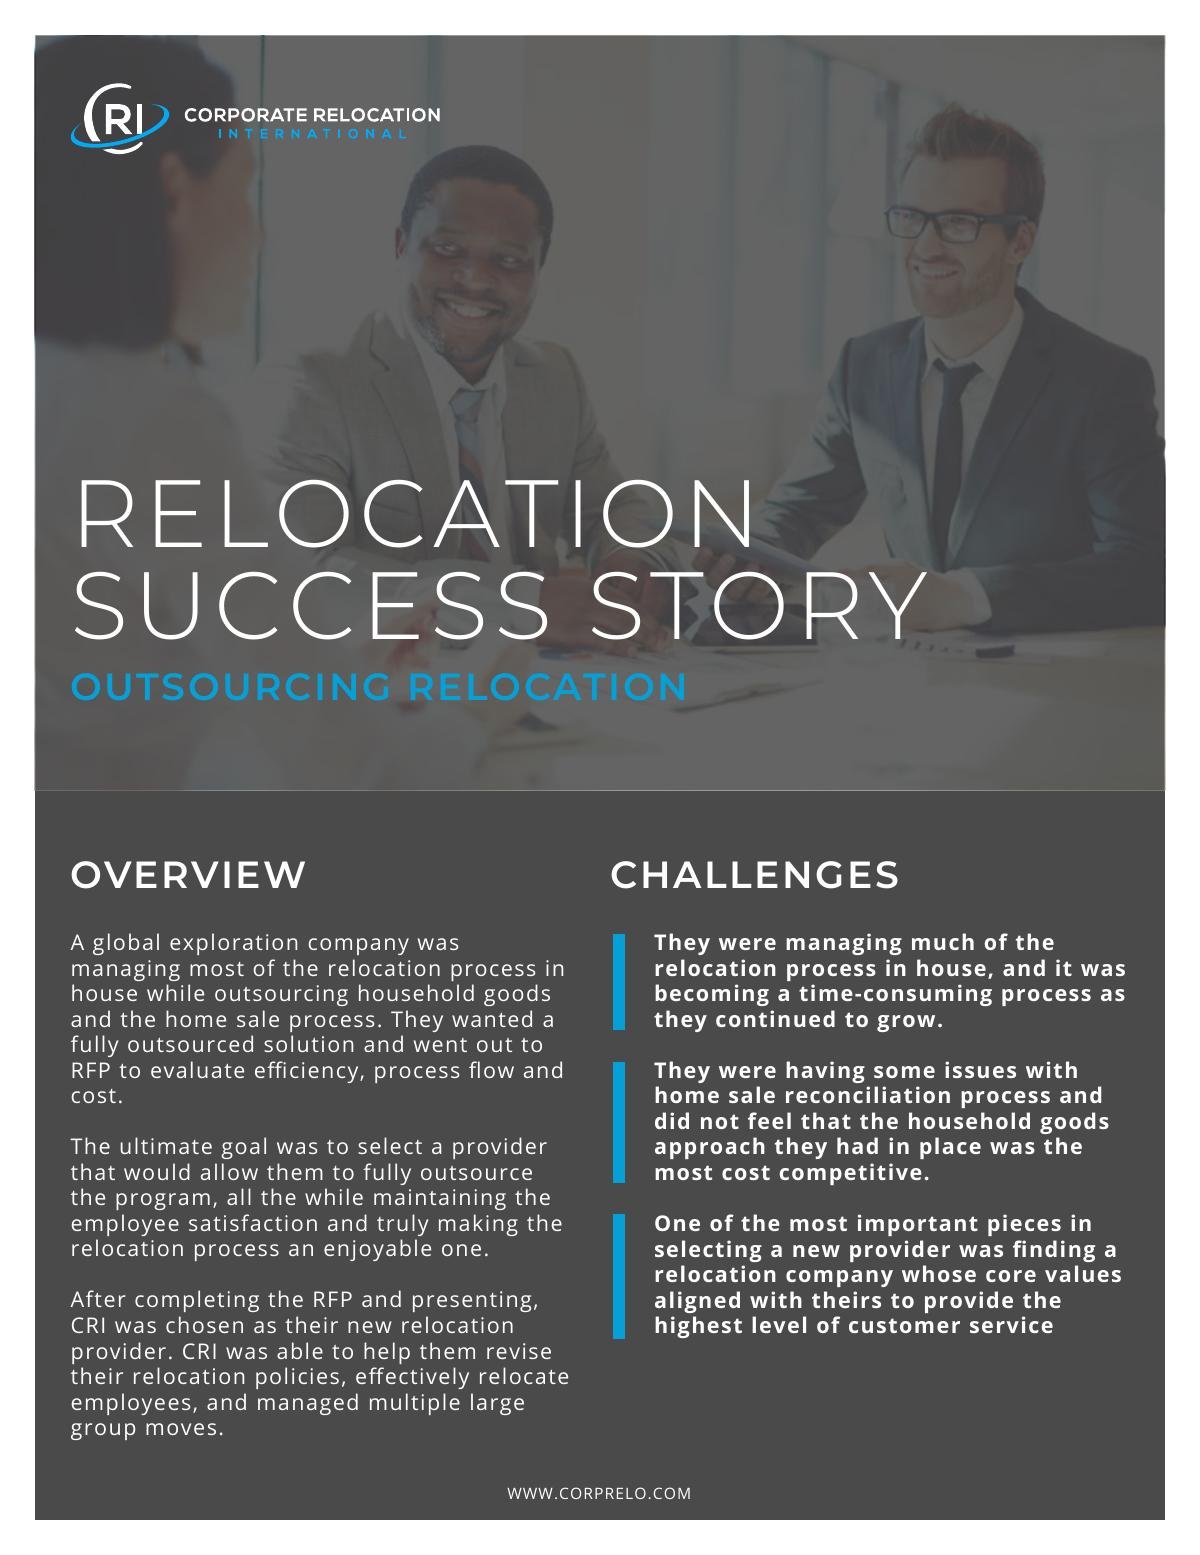 Relocation Success Story: Outsourcing